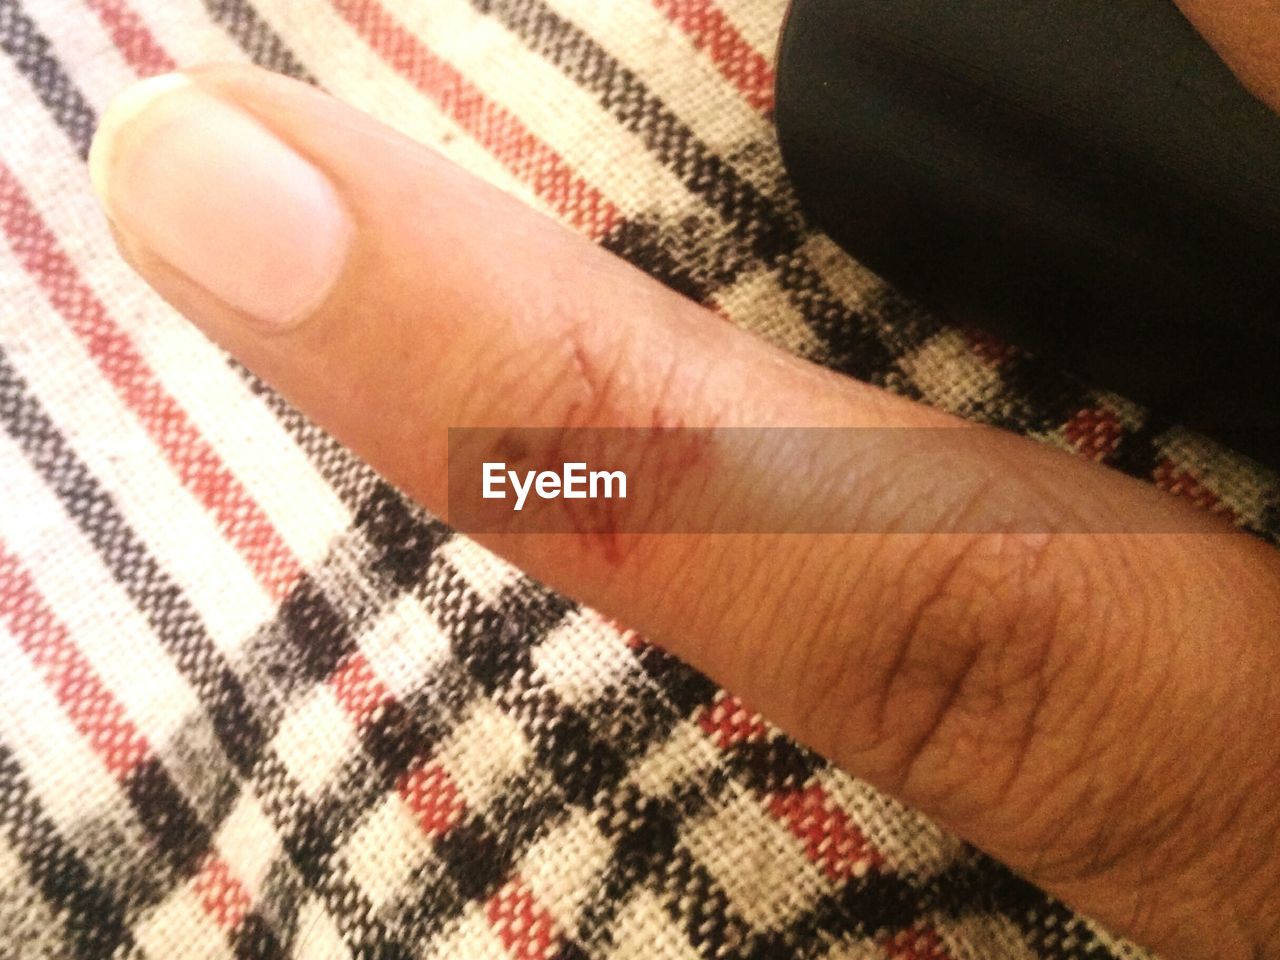 CROPPED IMAGE OF HAND